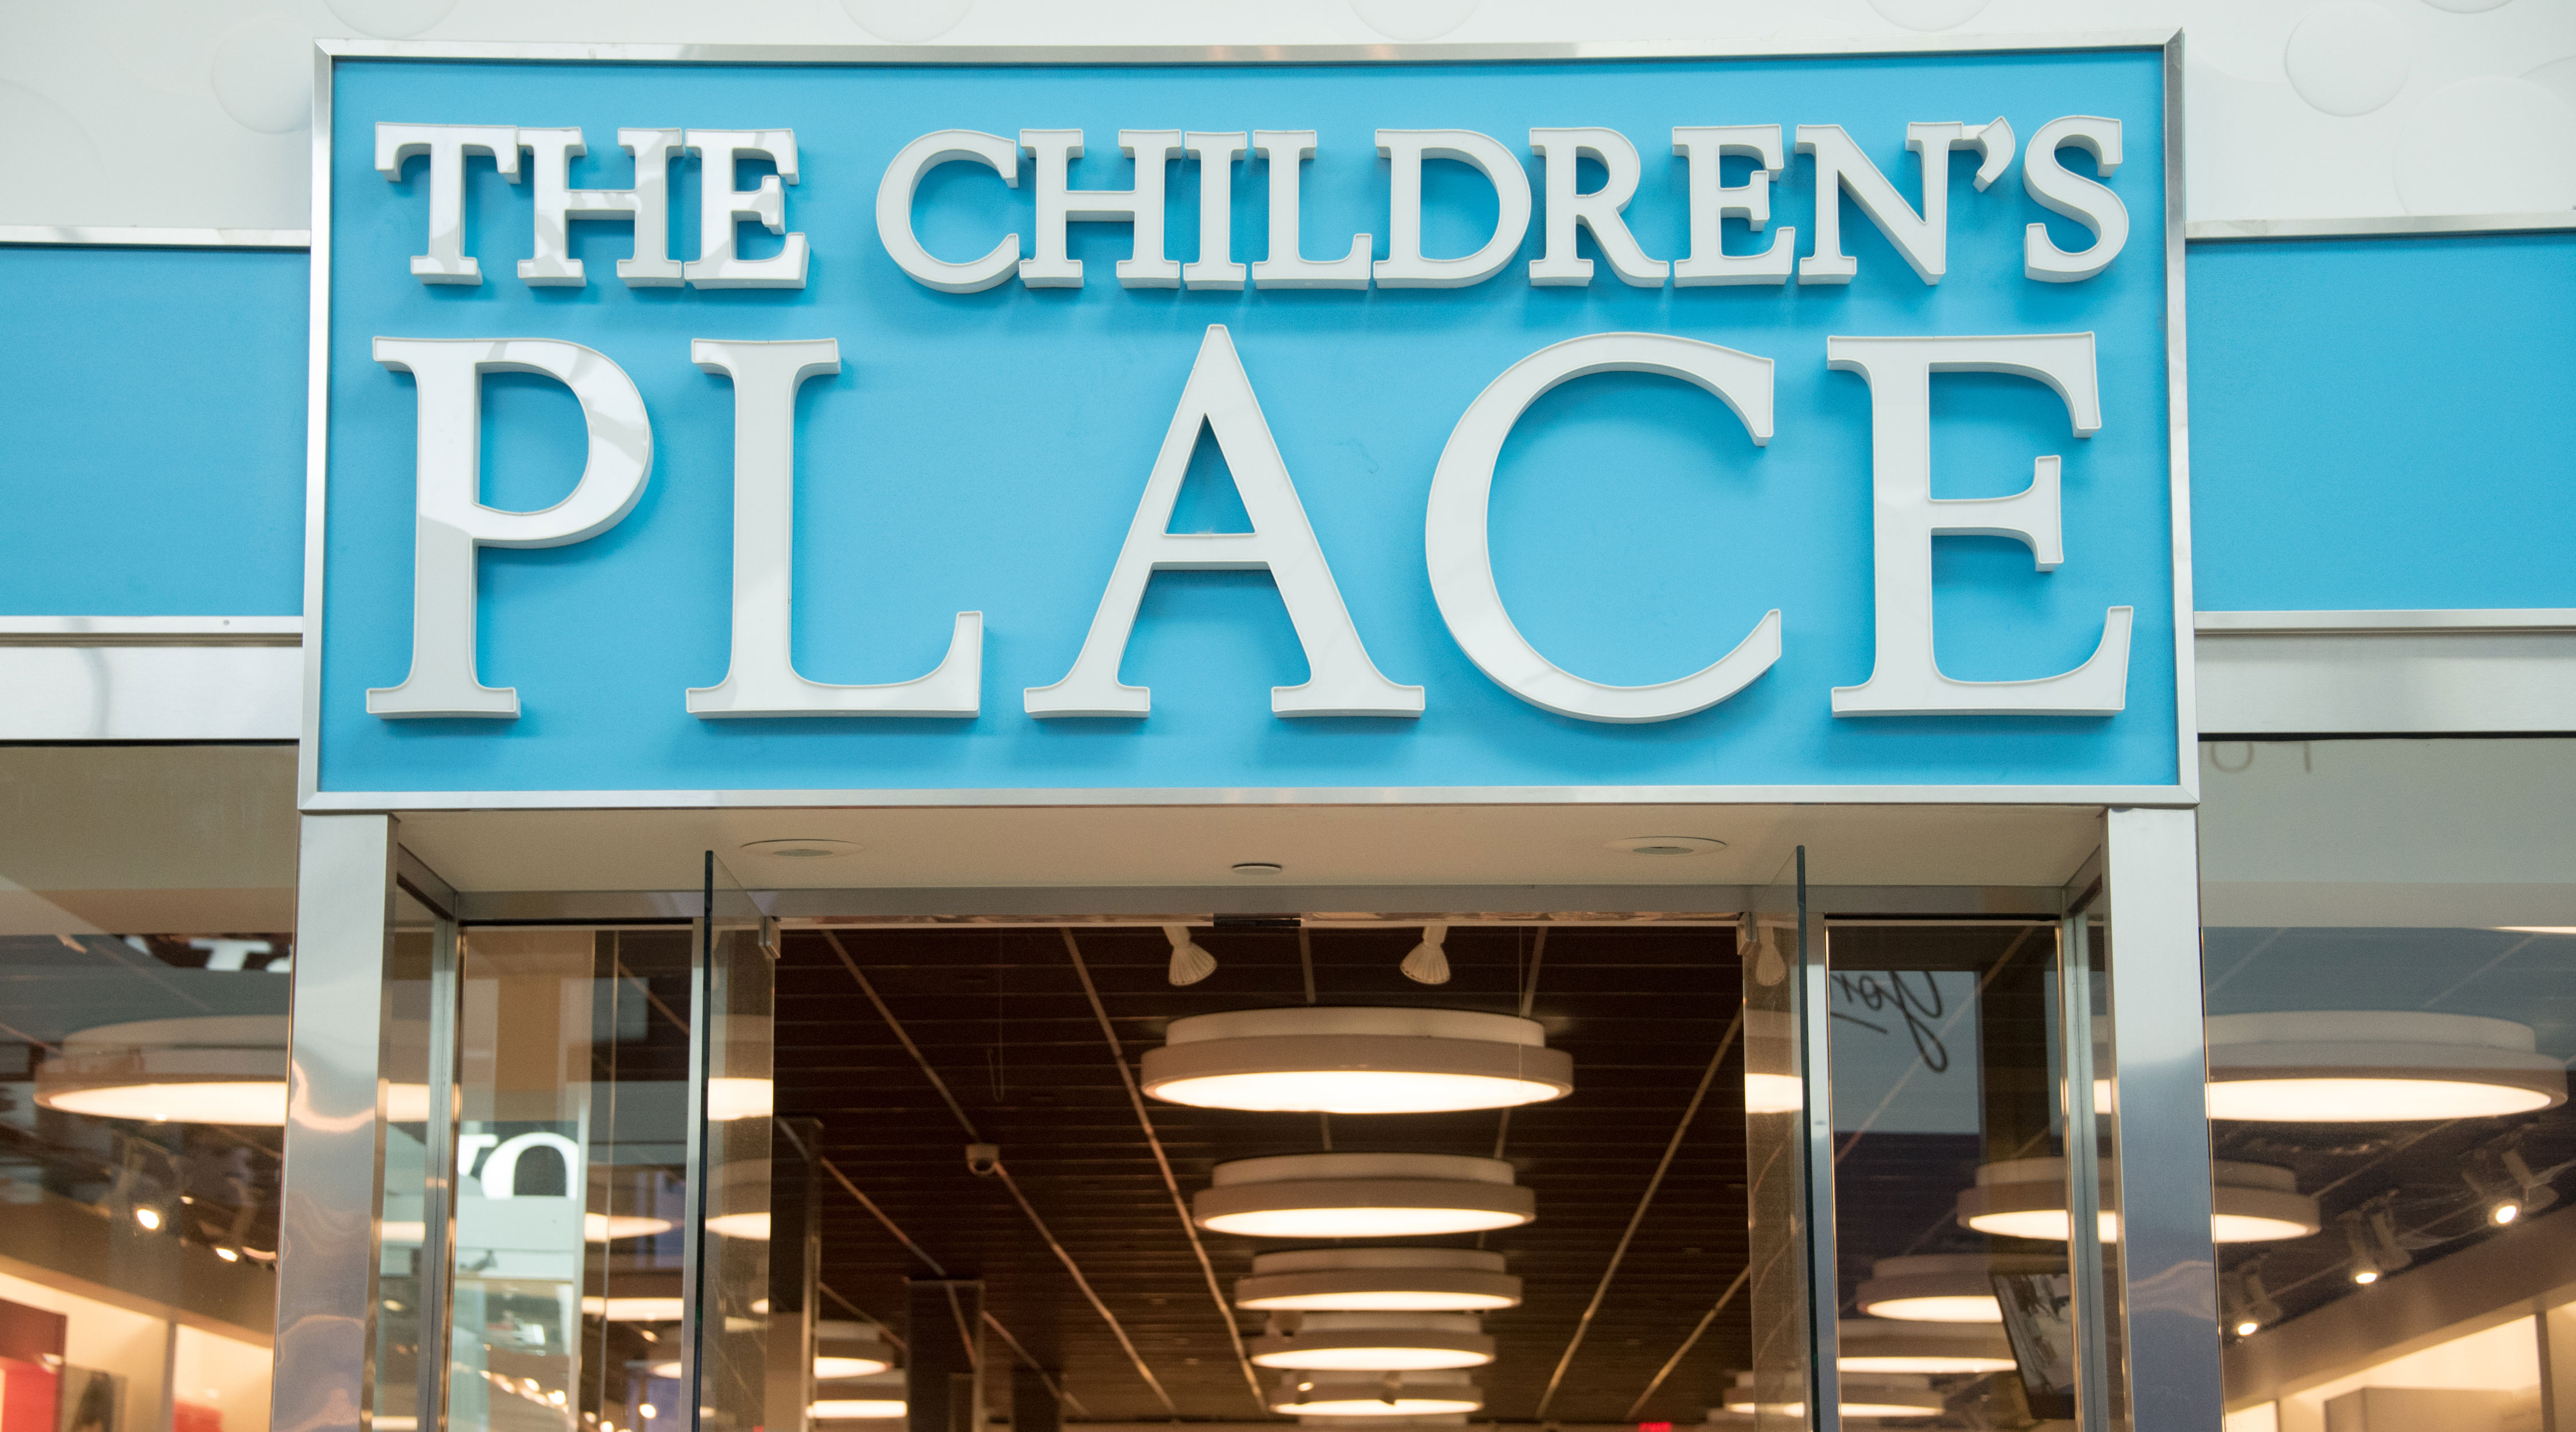 kids' clothing company The Children's Place storefront